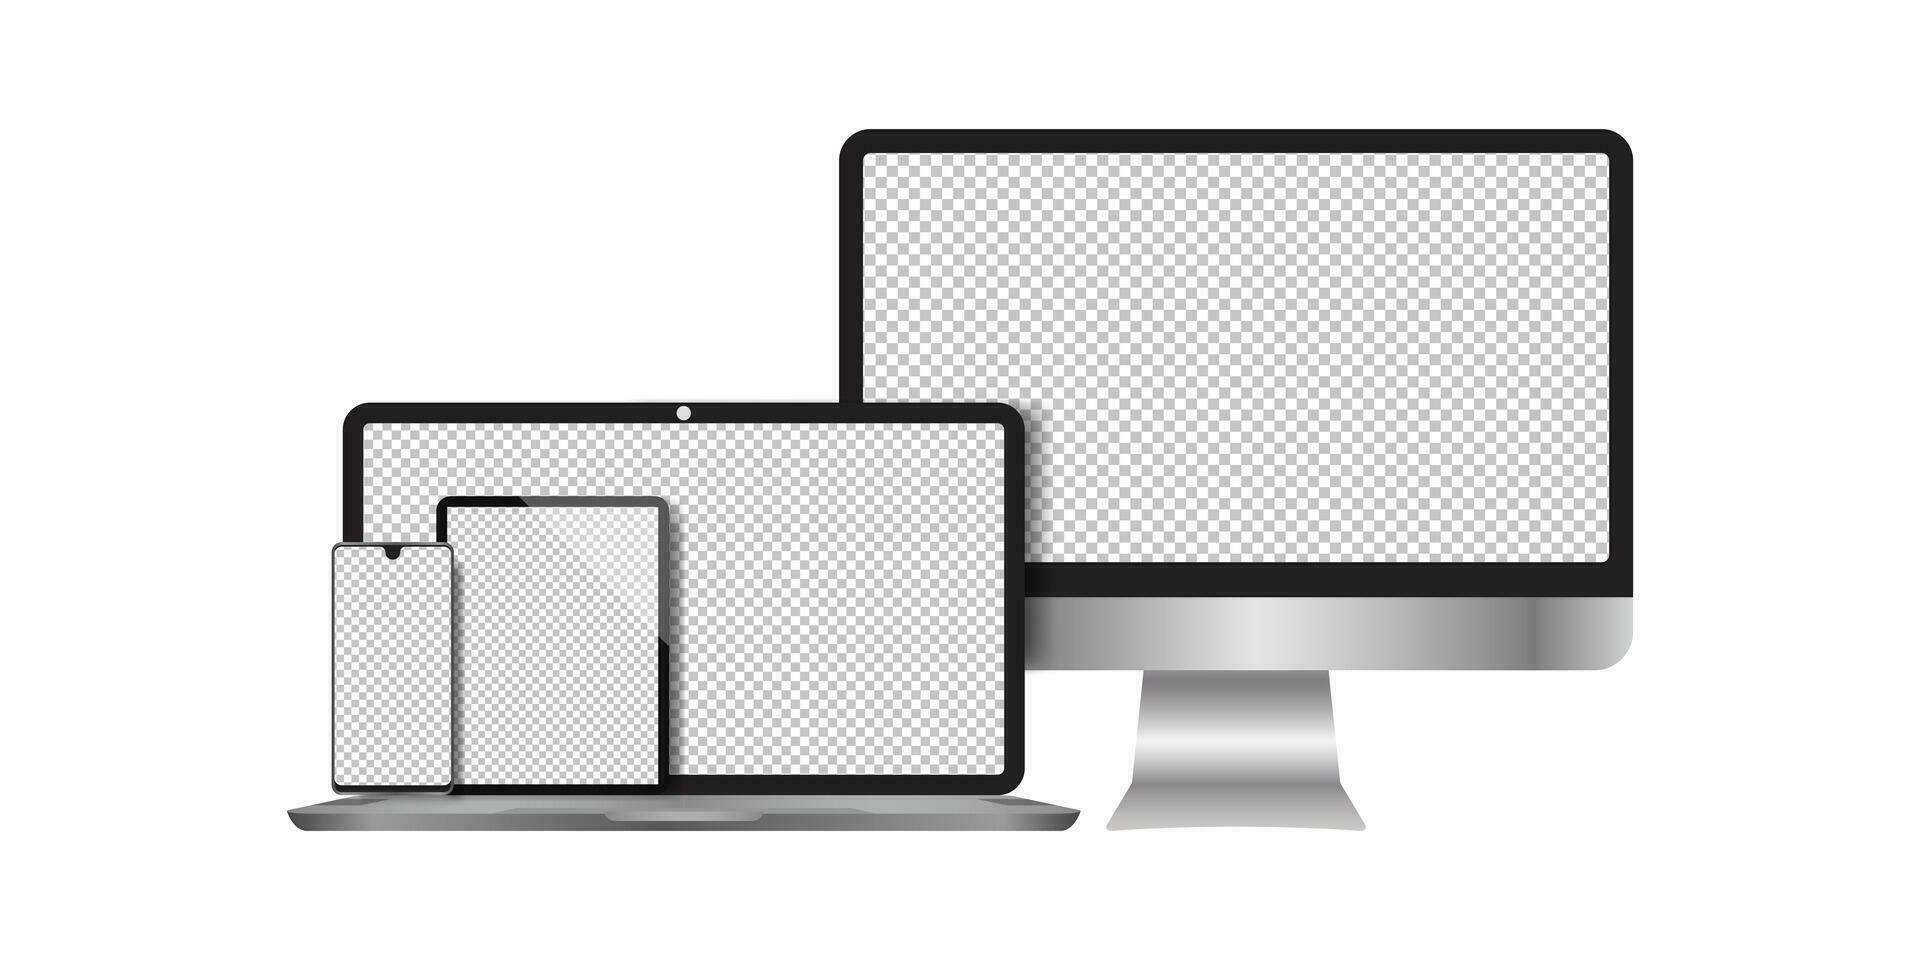 Realistic computers, laptops, tablets, smartphone monitors with a white background vector